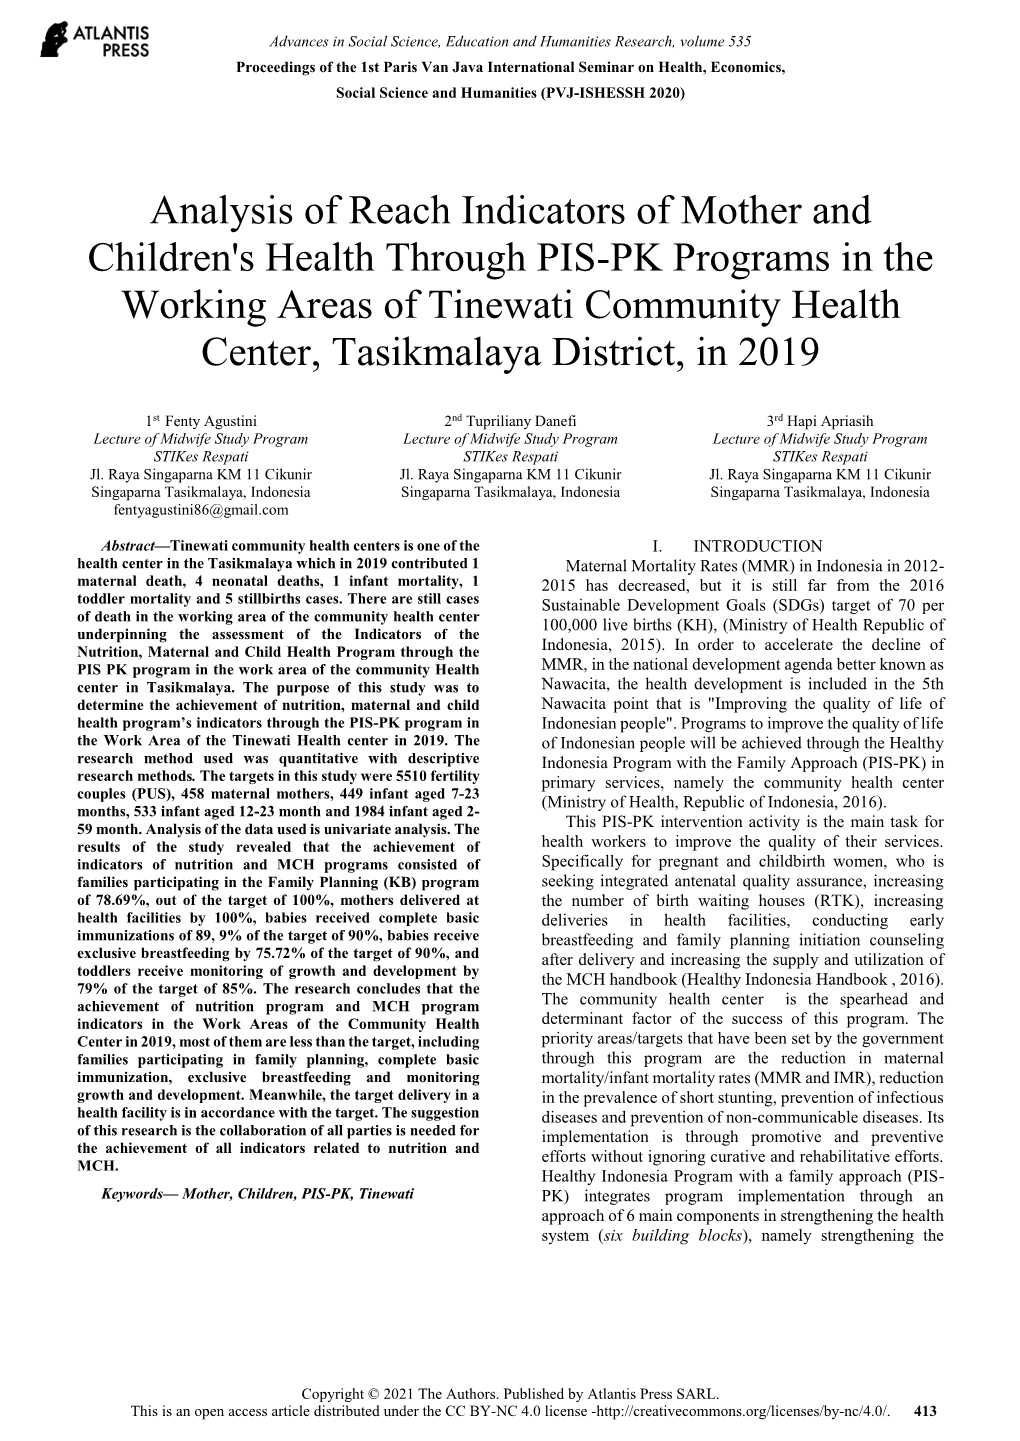 Analysis of Reach Indicators of Mother and Children's Health Through PIS